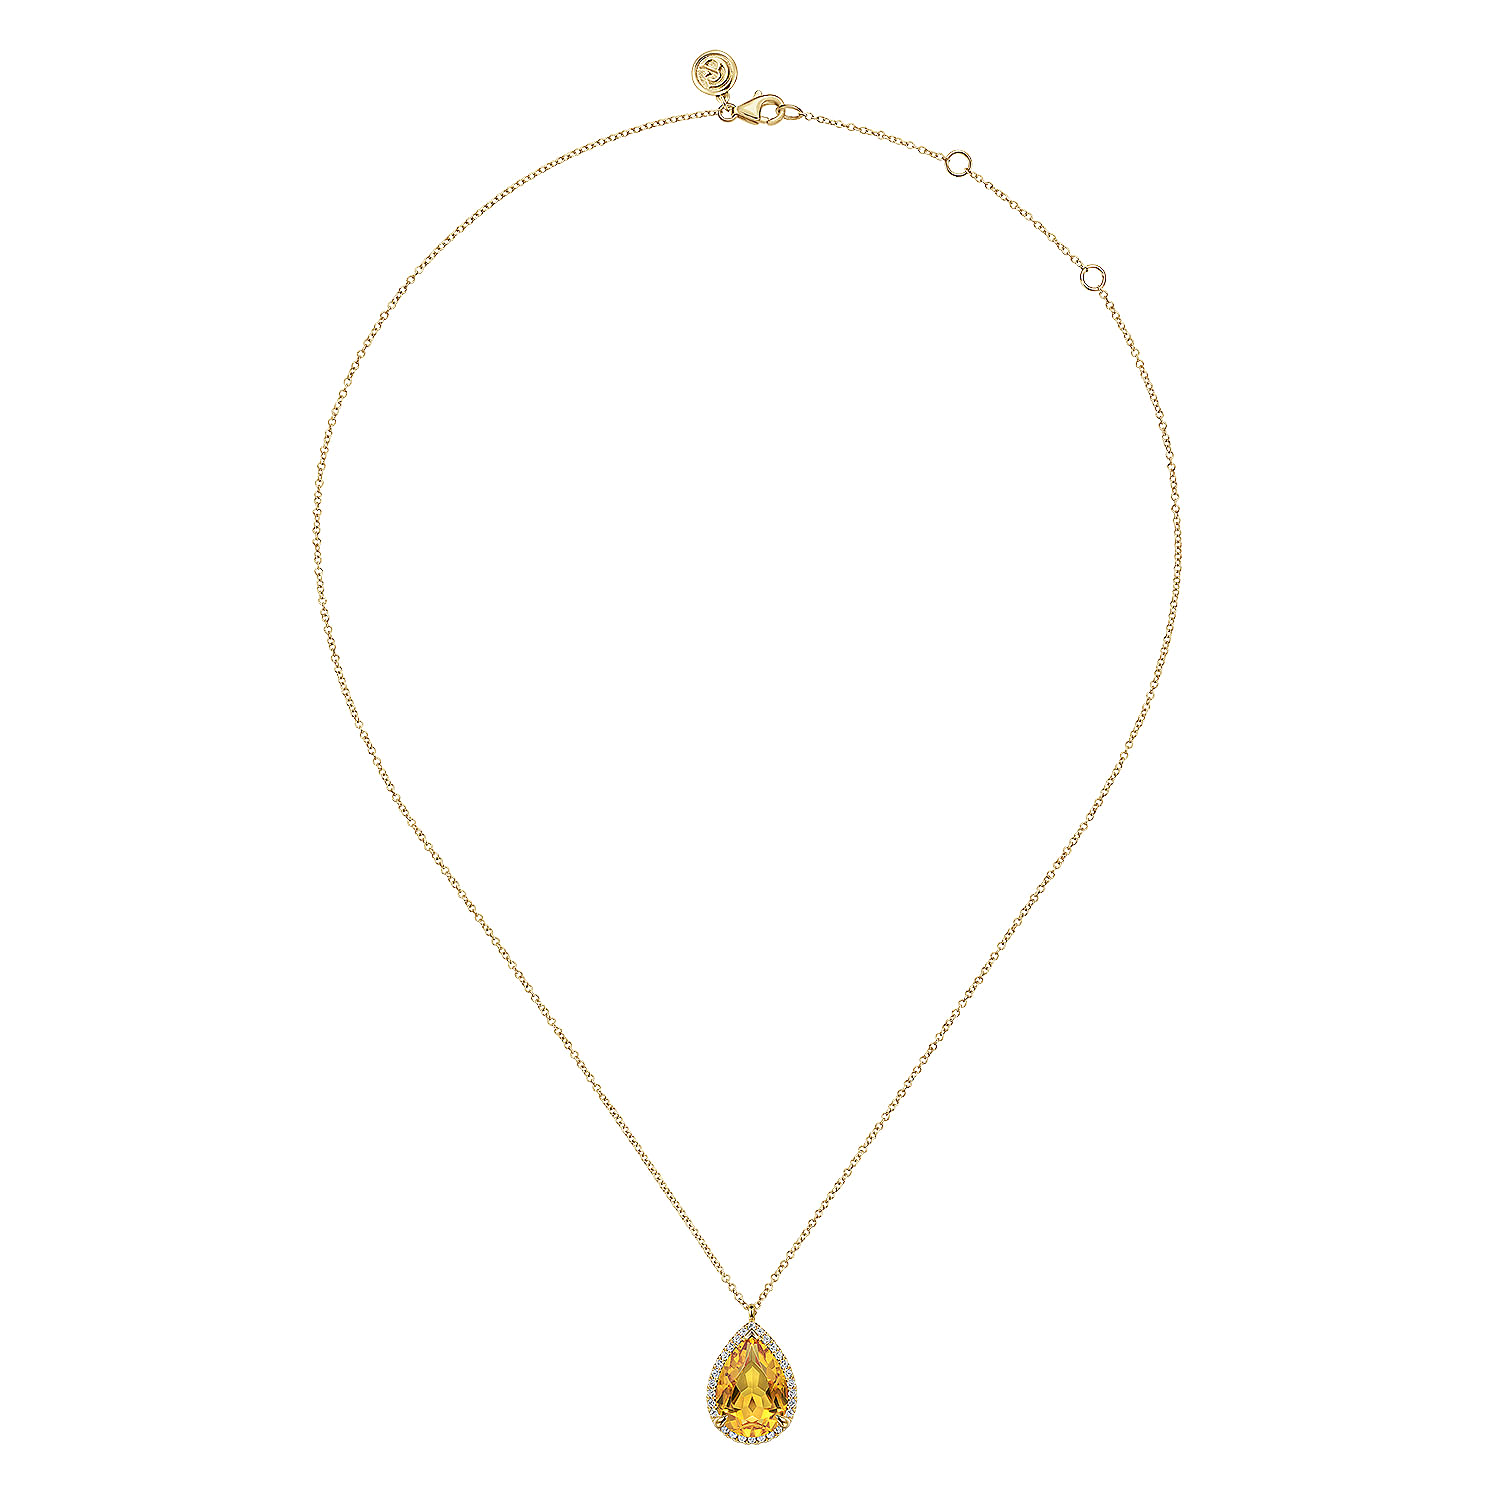 14K Yellow Gold Diamond and Flat Pear Shape Citrine Necklace With Flower Pattern J-Back